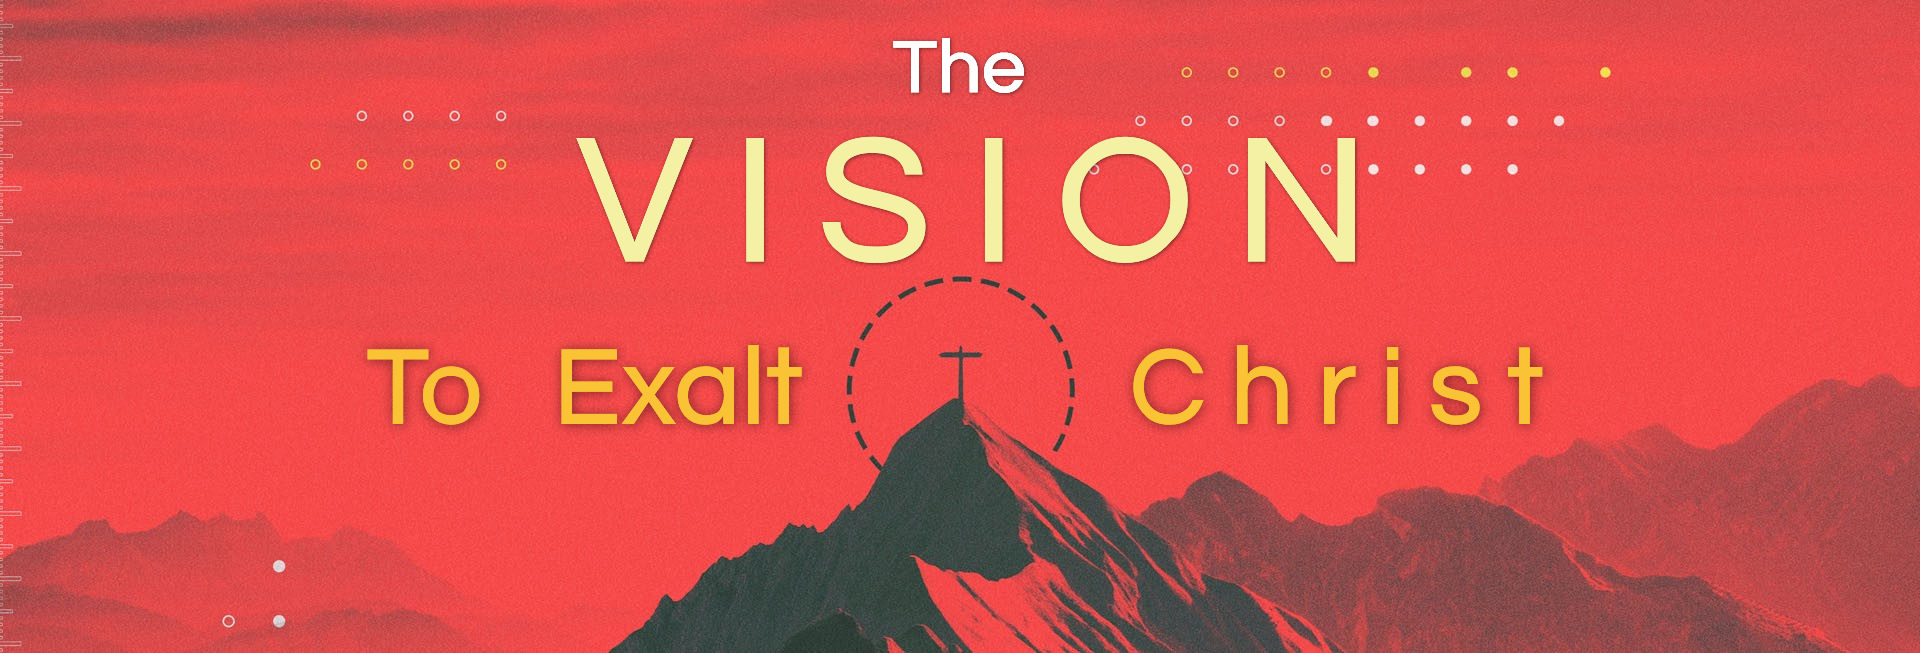 Vision Sunday Red Mountains Church Website Graphic